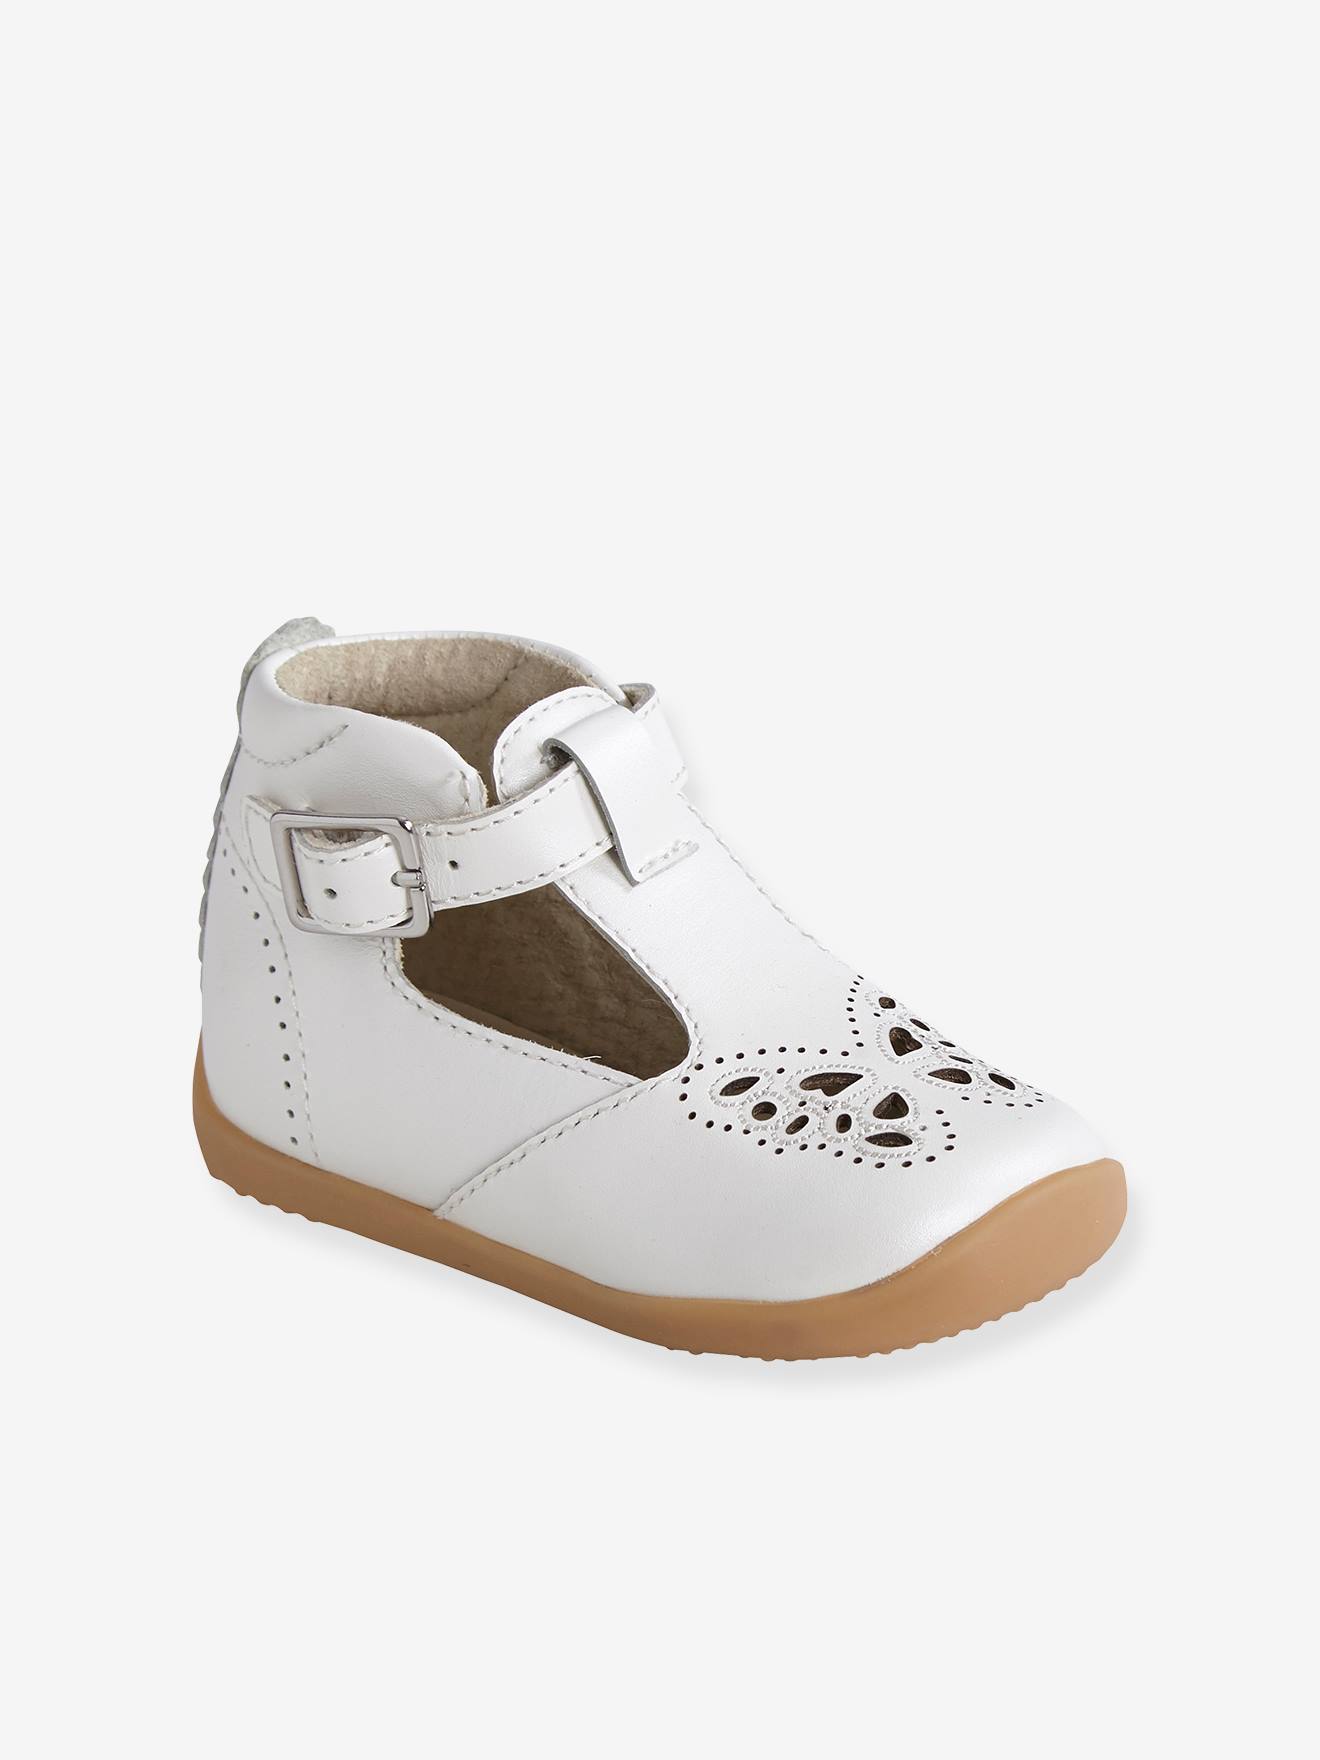 white baby shoes for girls